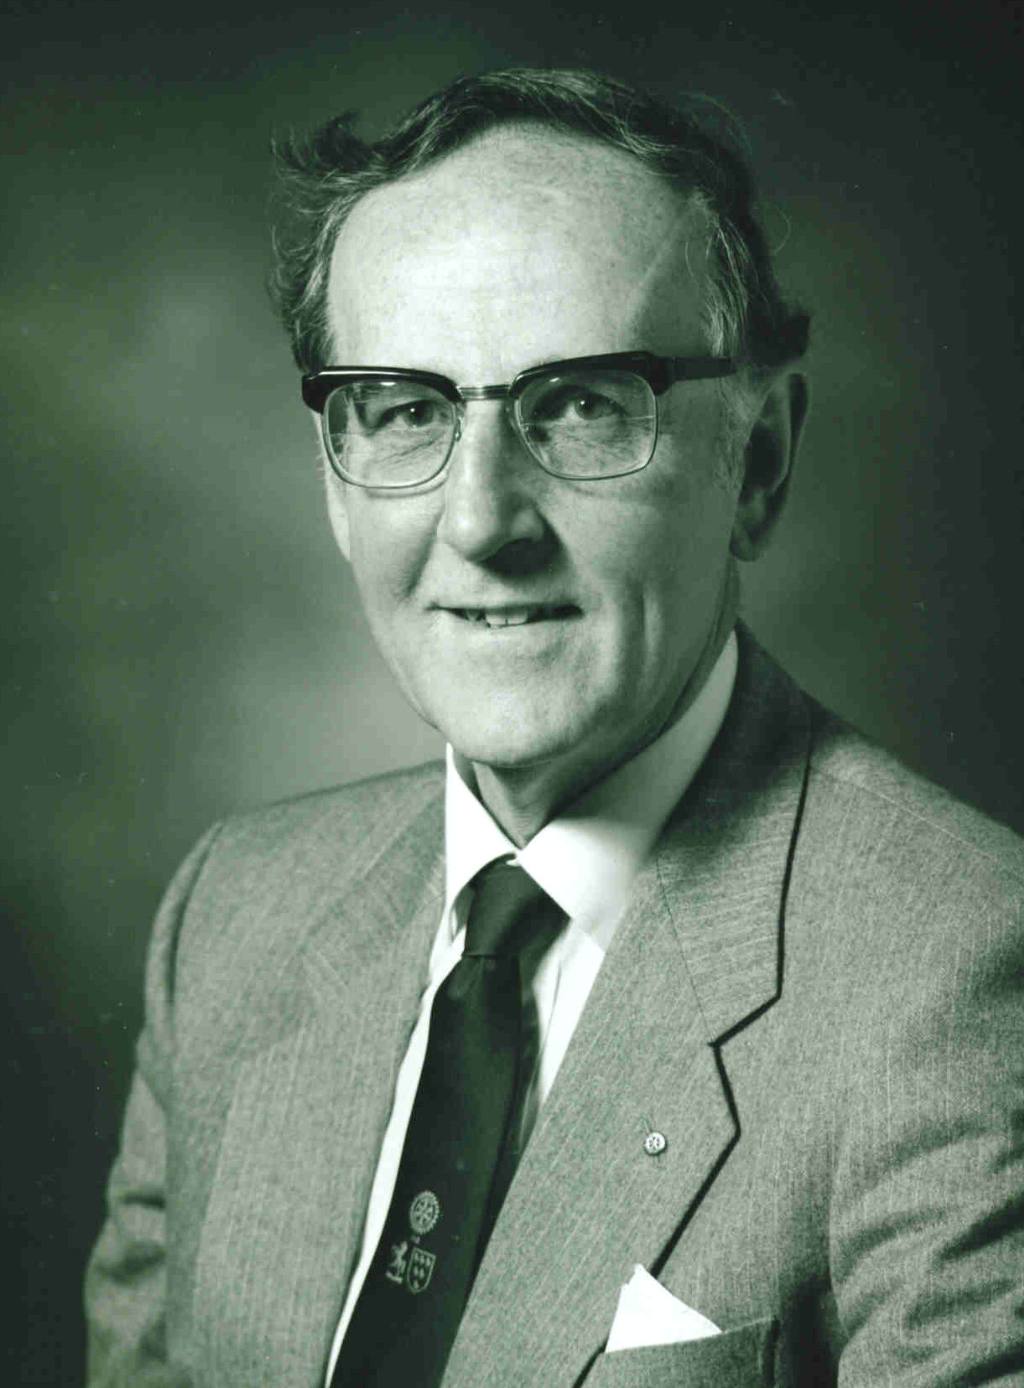 Past Presidents 1980-1989 (click here) - Robert. G. Knowles 1989/90